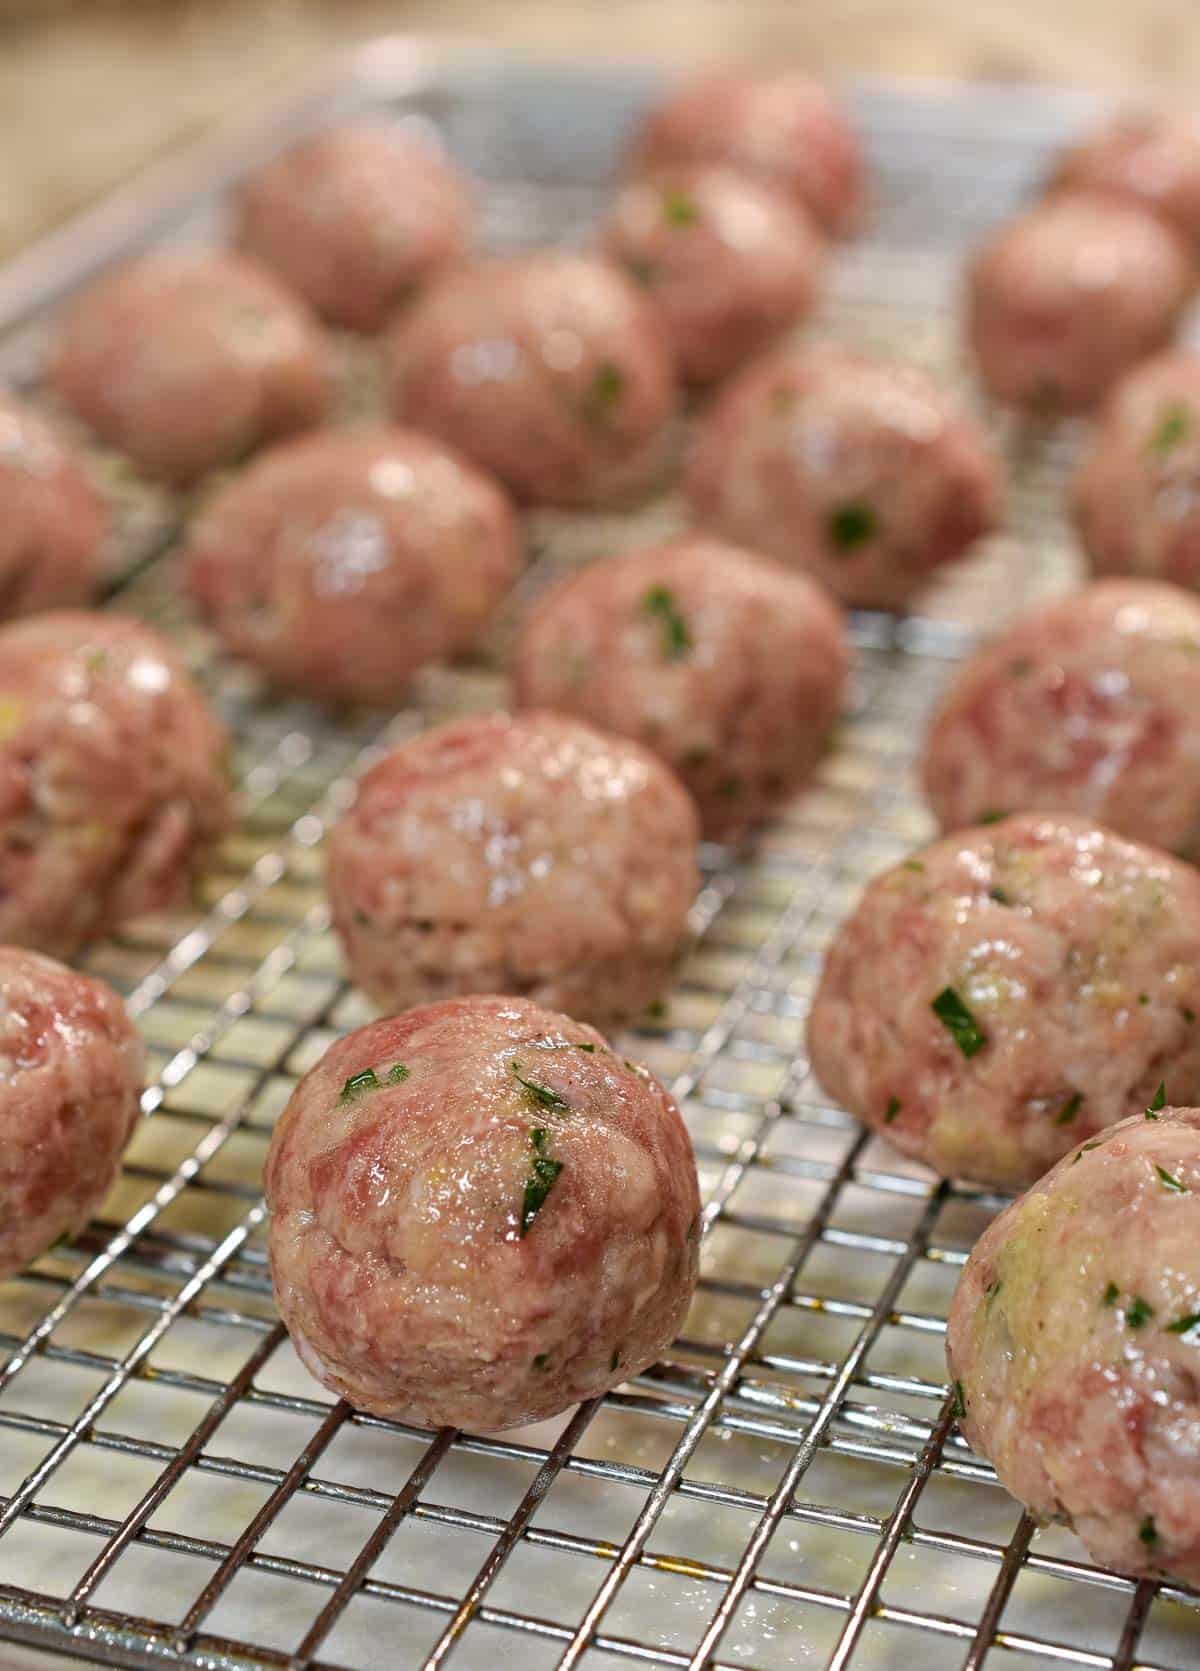 Meatballs on a baking rack ready to bake.